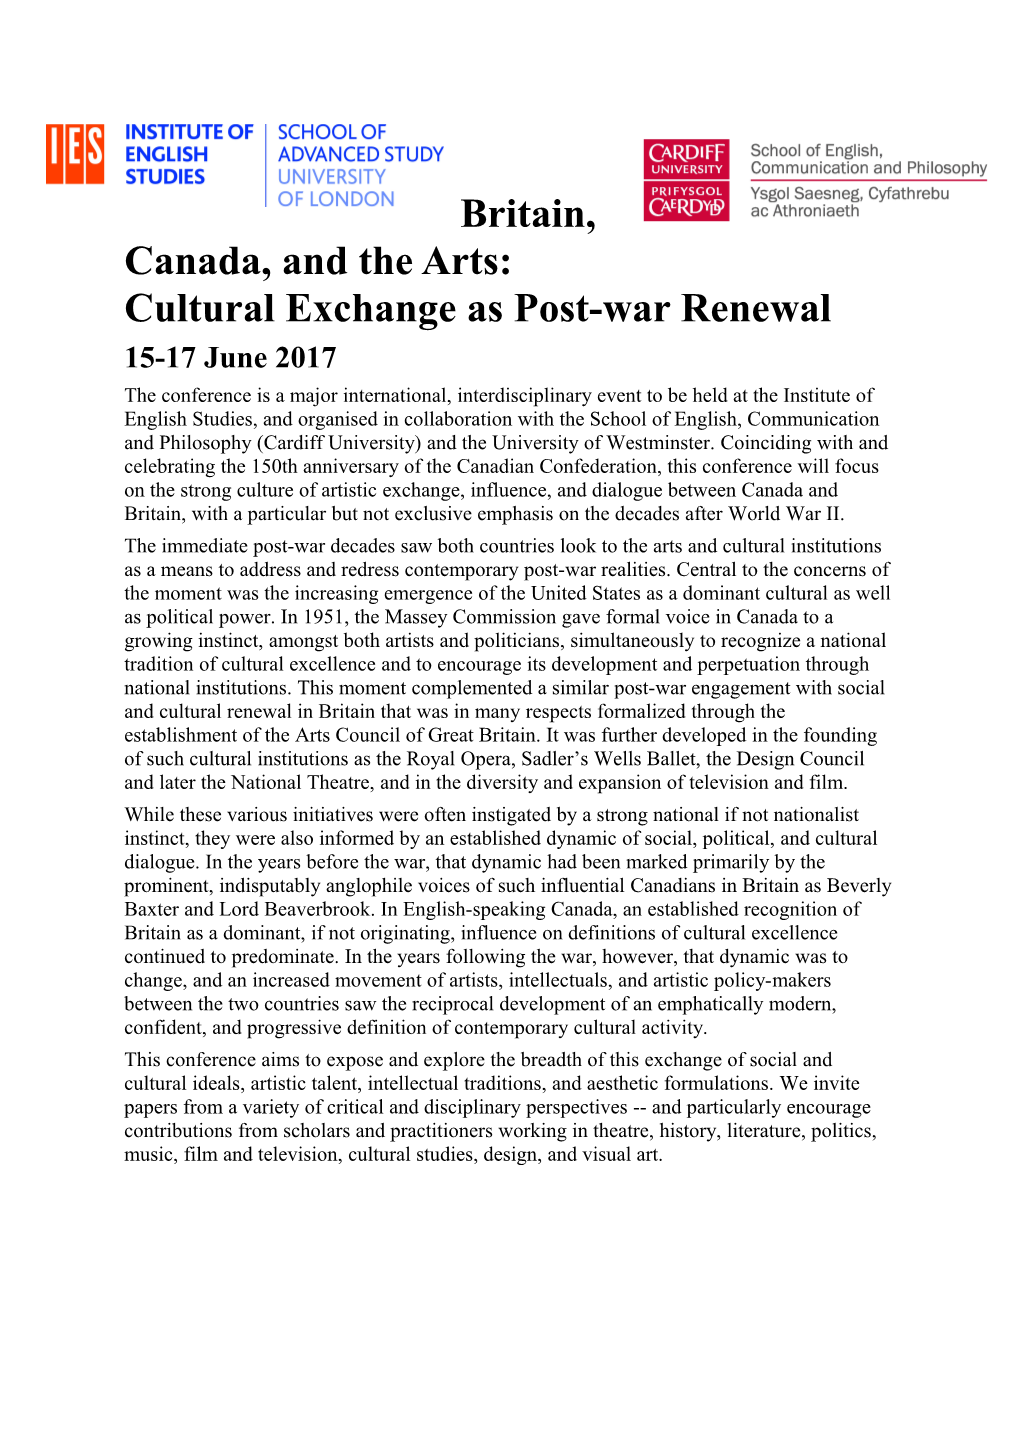 Britain, Canada, and the Arts: Cultural Exchange As Post-War Renewal